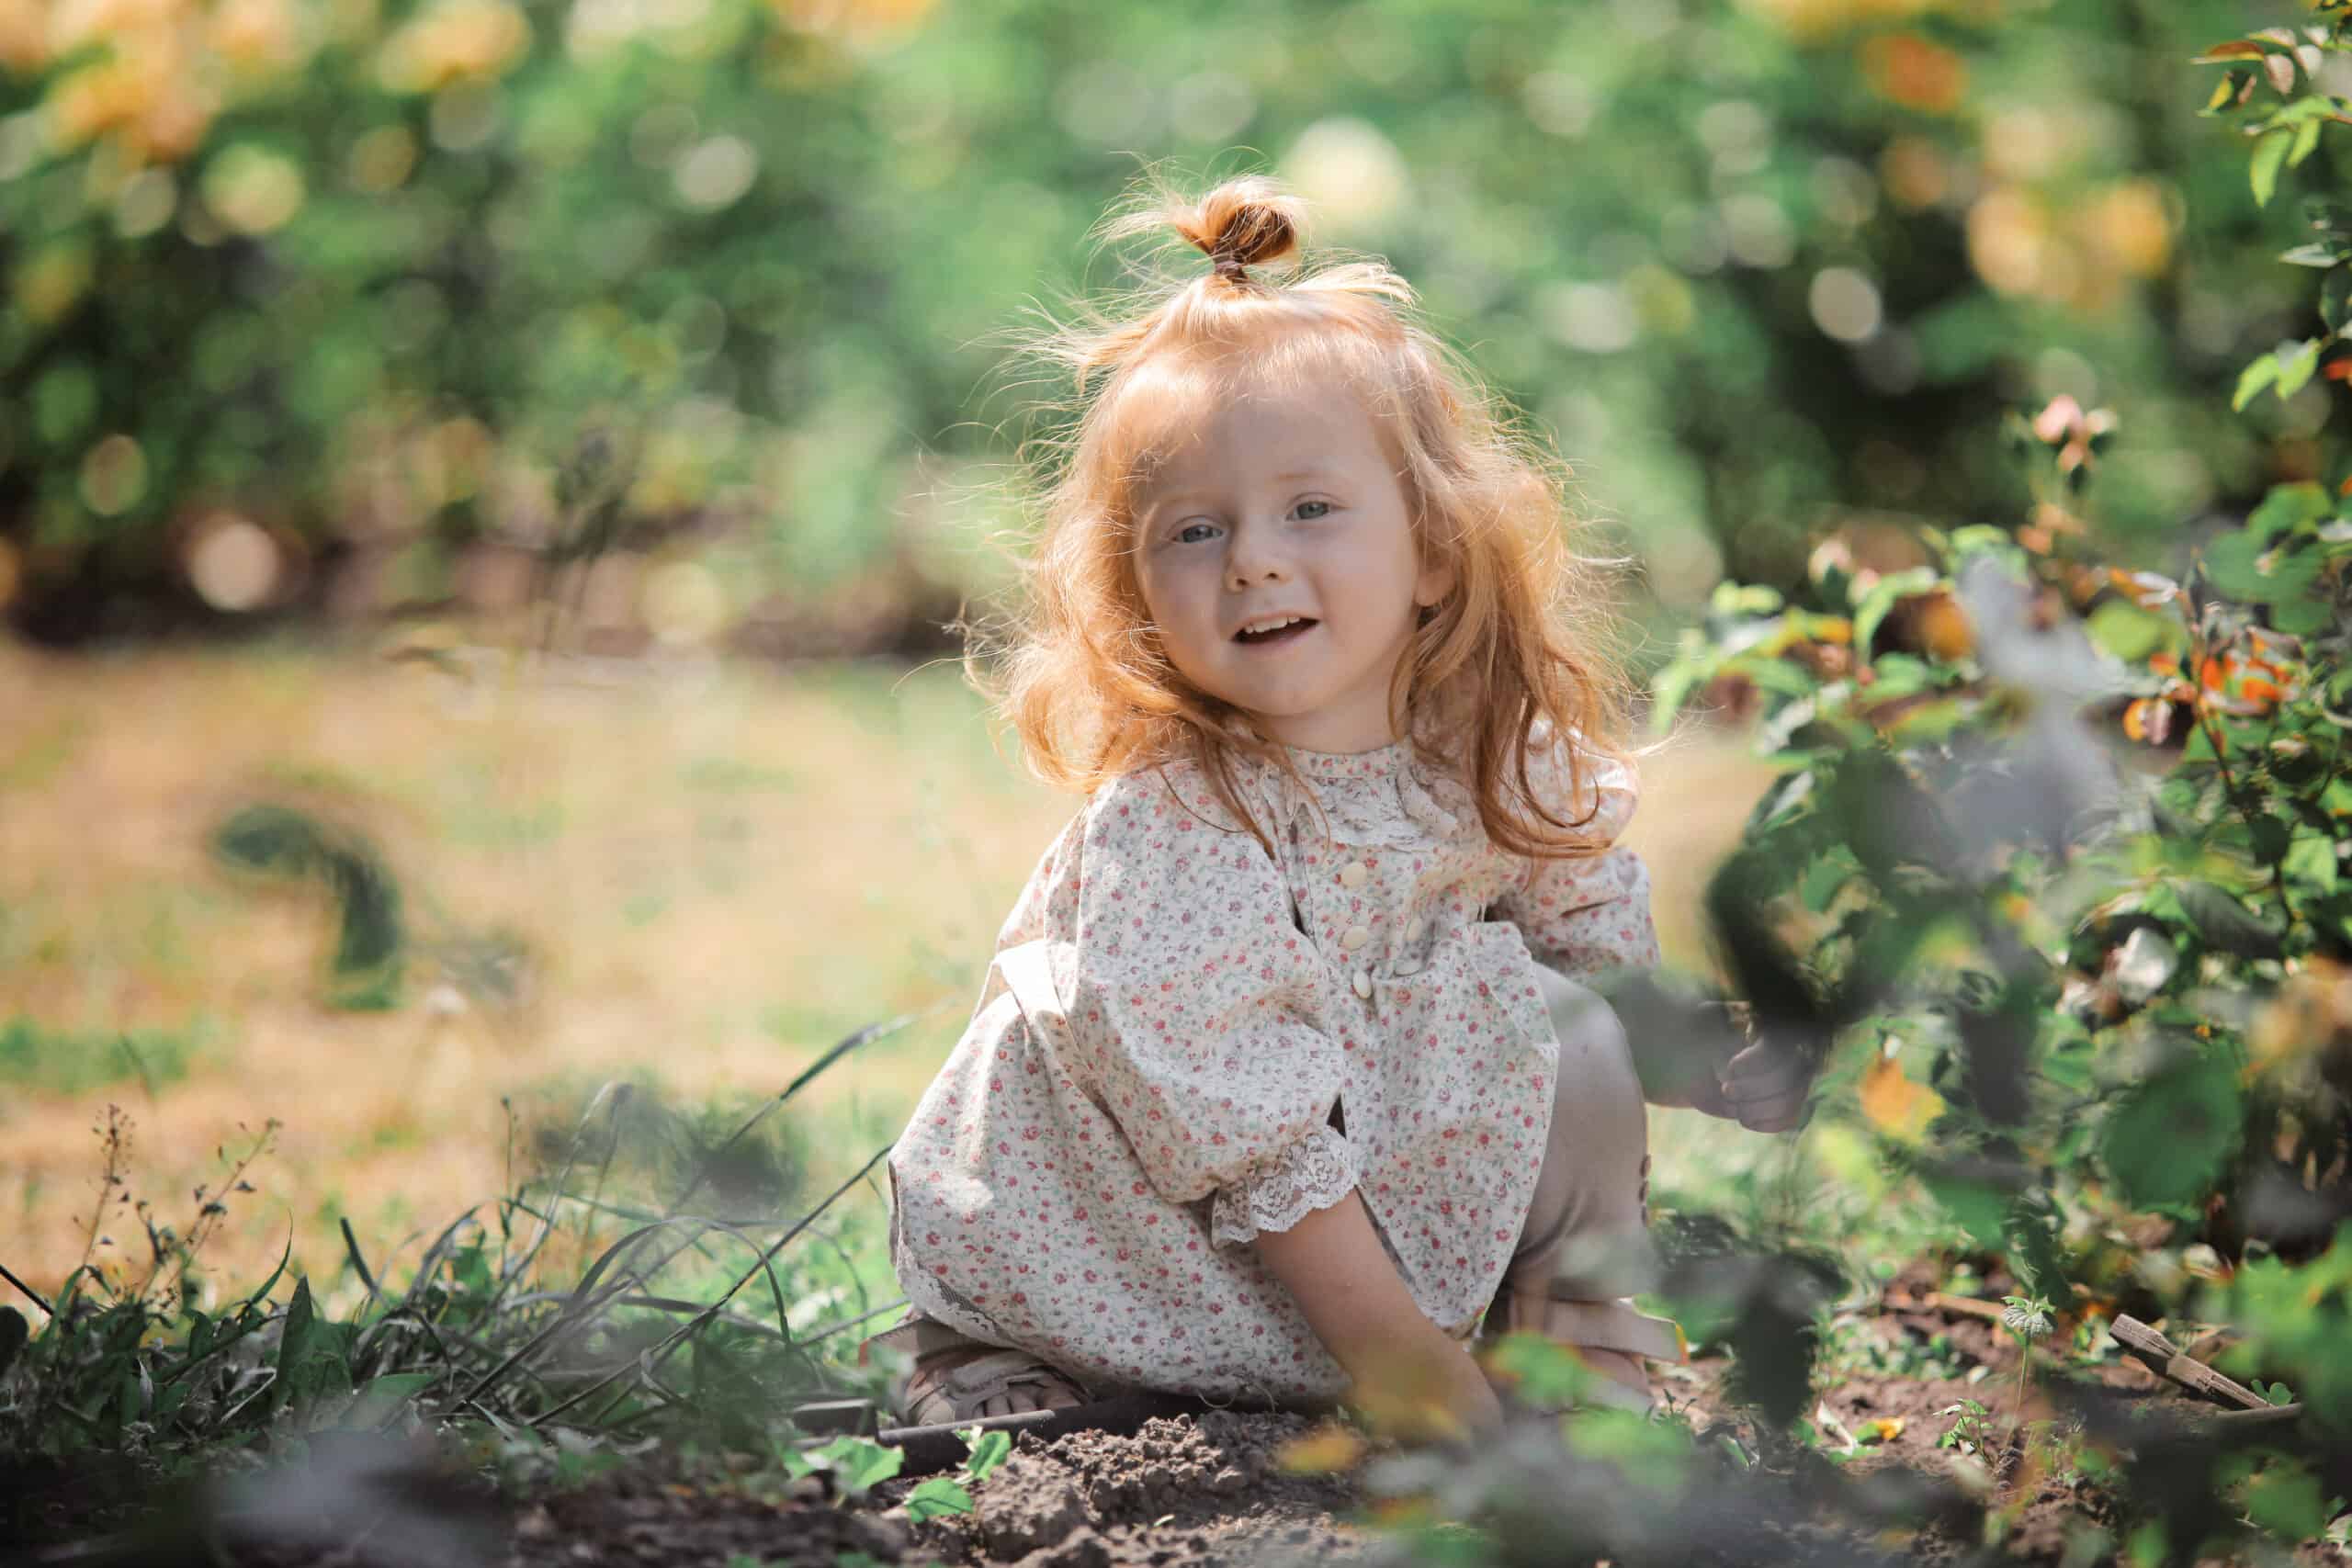 Little red-hair girl walk on sunny roses flowerbed in park. Foxy hair toddler run through high grass in the magic summer sun light, having fun carefree happy childhood